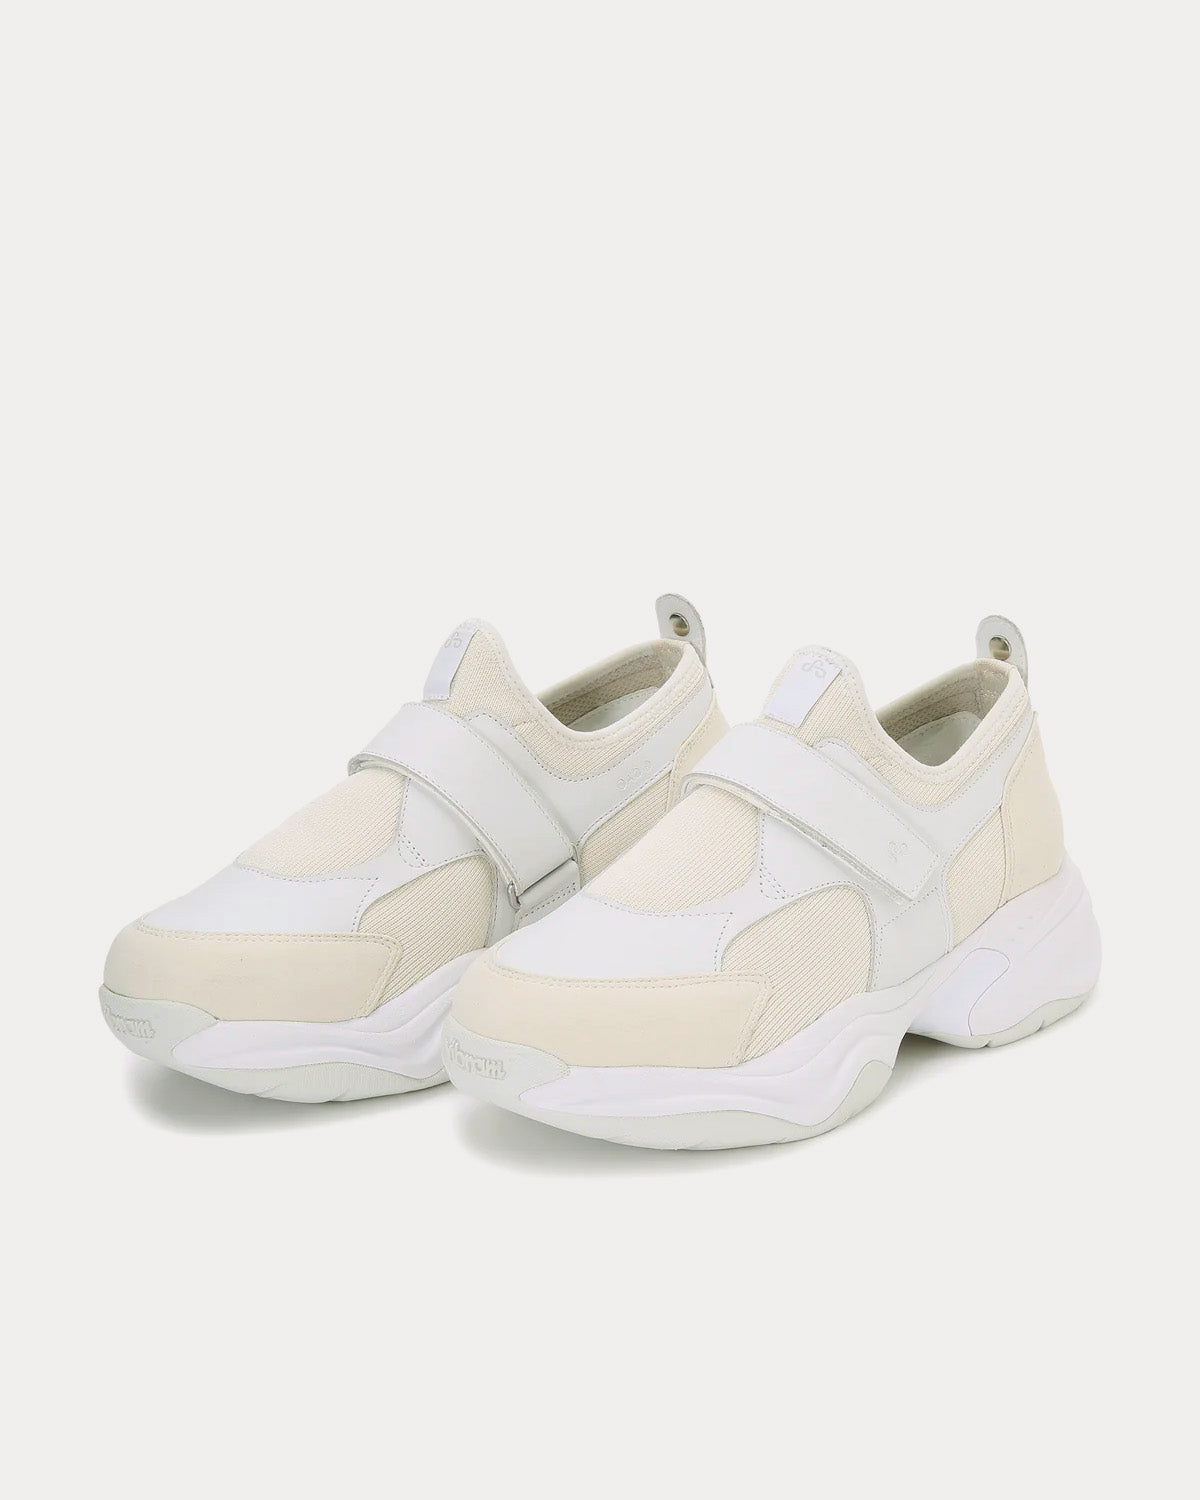 OAO - Wovent White Slip On Sneakers